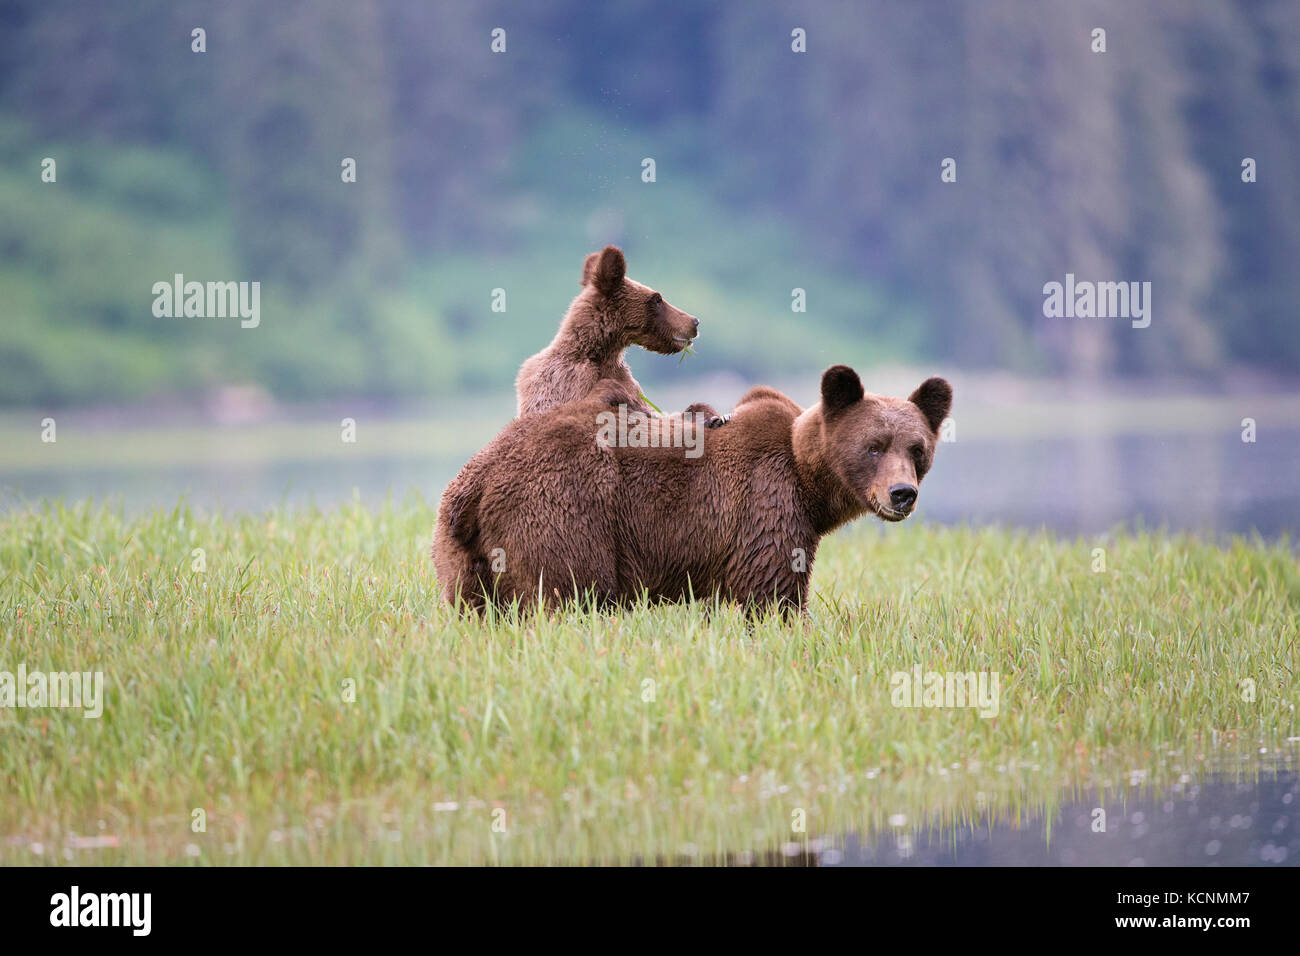 Grizzly bear (Ursus arctos horriblis), female, eating Lyngbye's sedge (Carex lyngbyei), and yearling cub with paws on her back, Khutzeymateen Grizzly Bear Sanctuary, British Columbia, Canada. Stock Photo